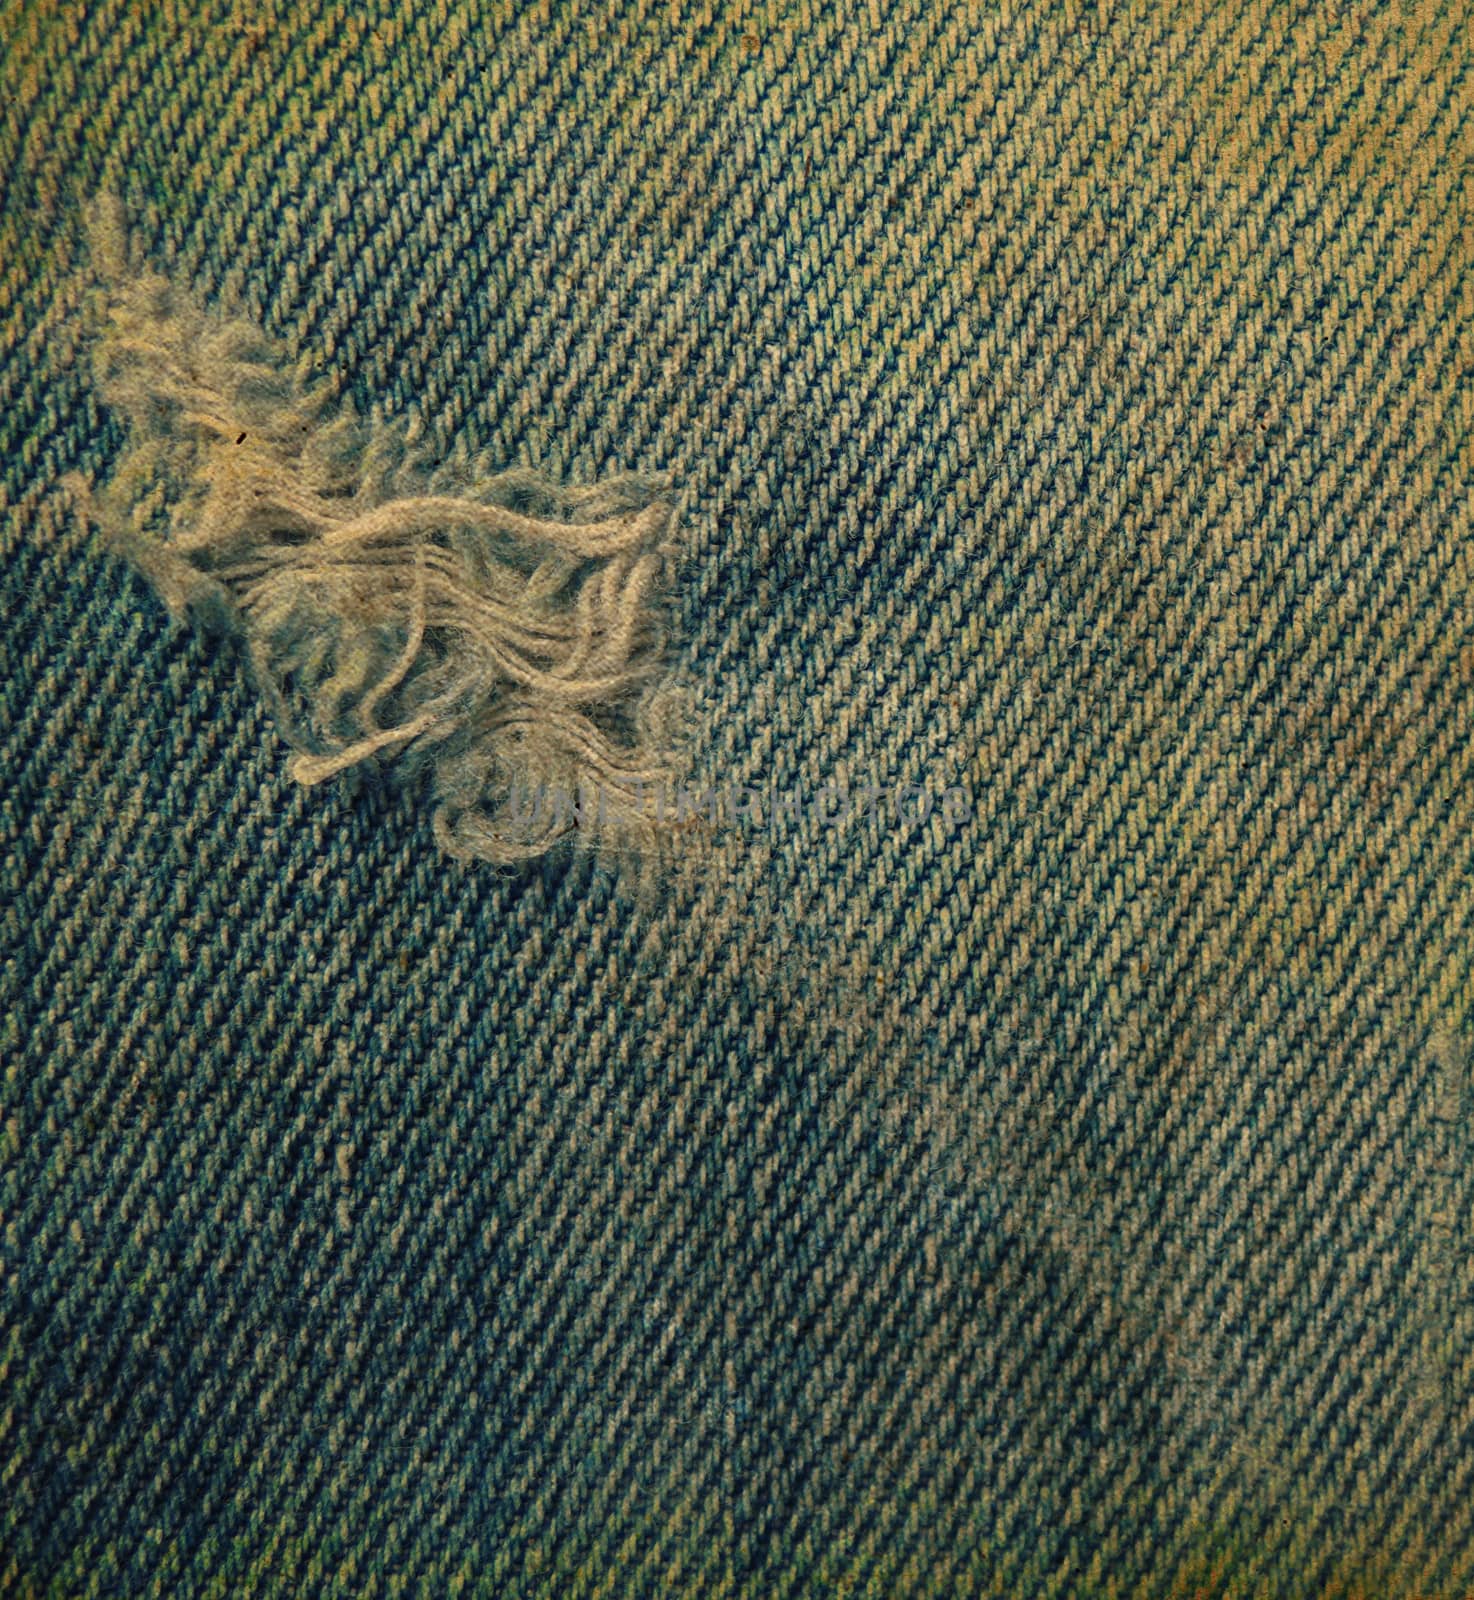 Vintage blue jean texture with a hole and threads showing by MalyDesigner